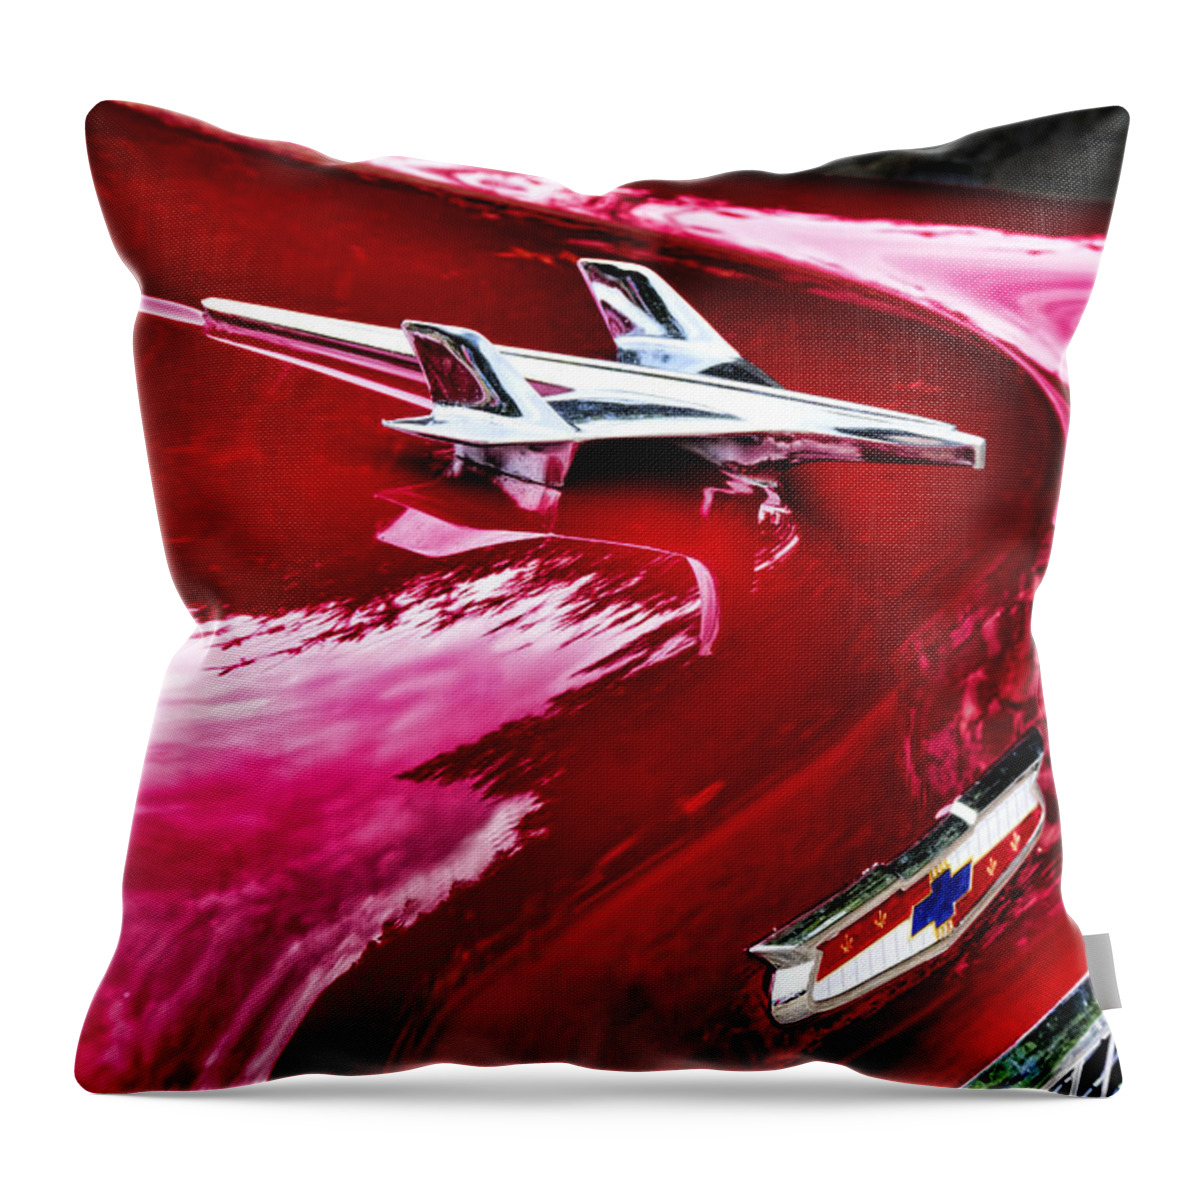 Chevy Throw Pillow featuring the photograph 1955 Chevy Bel Air Hood Ornament by Peggy Collins